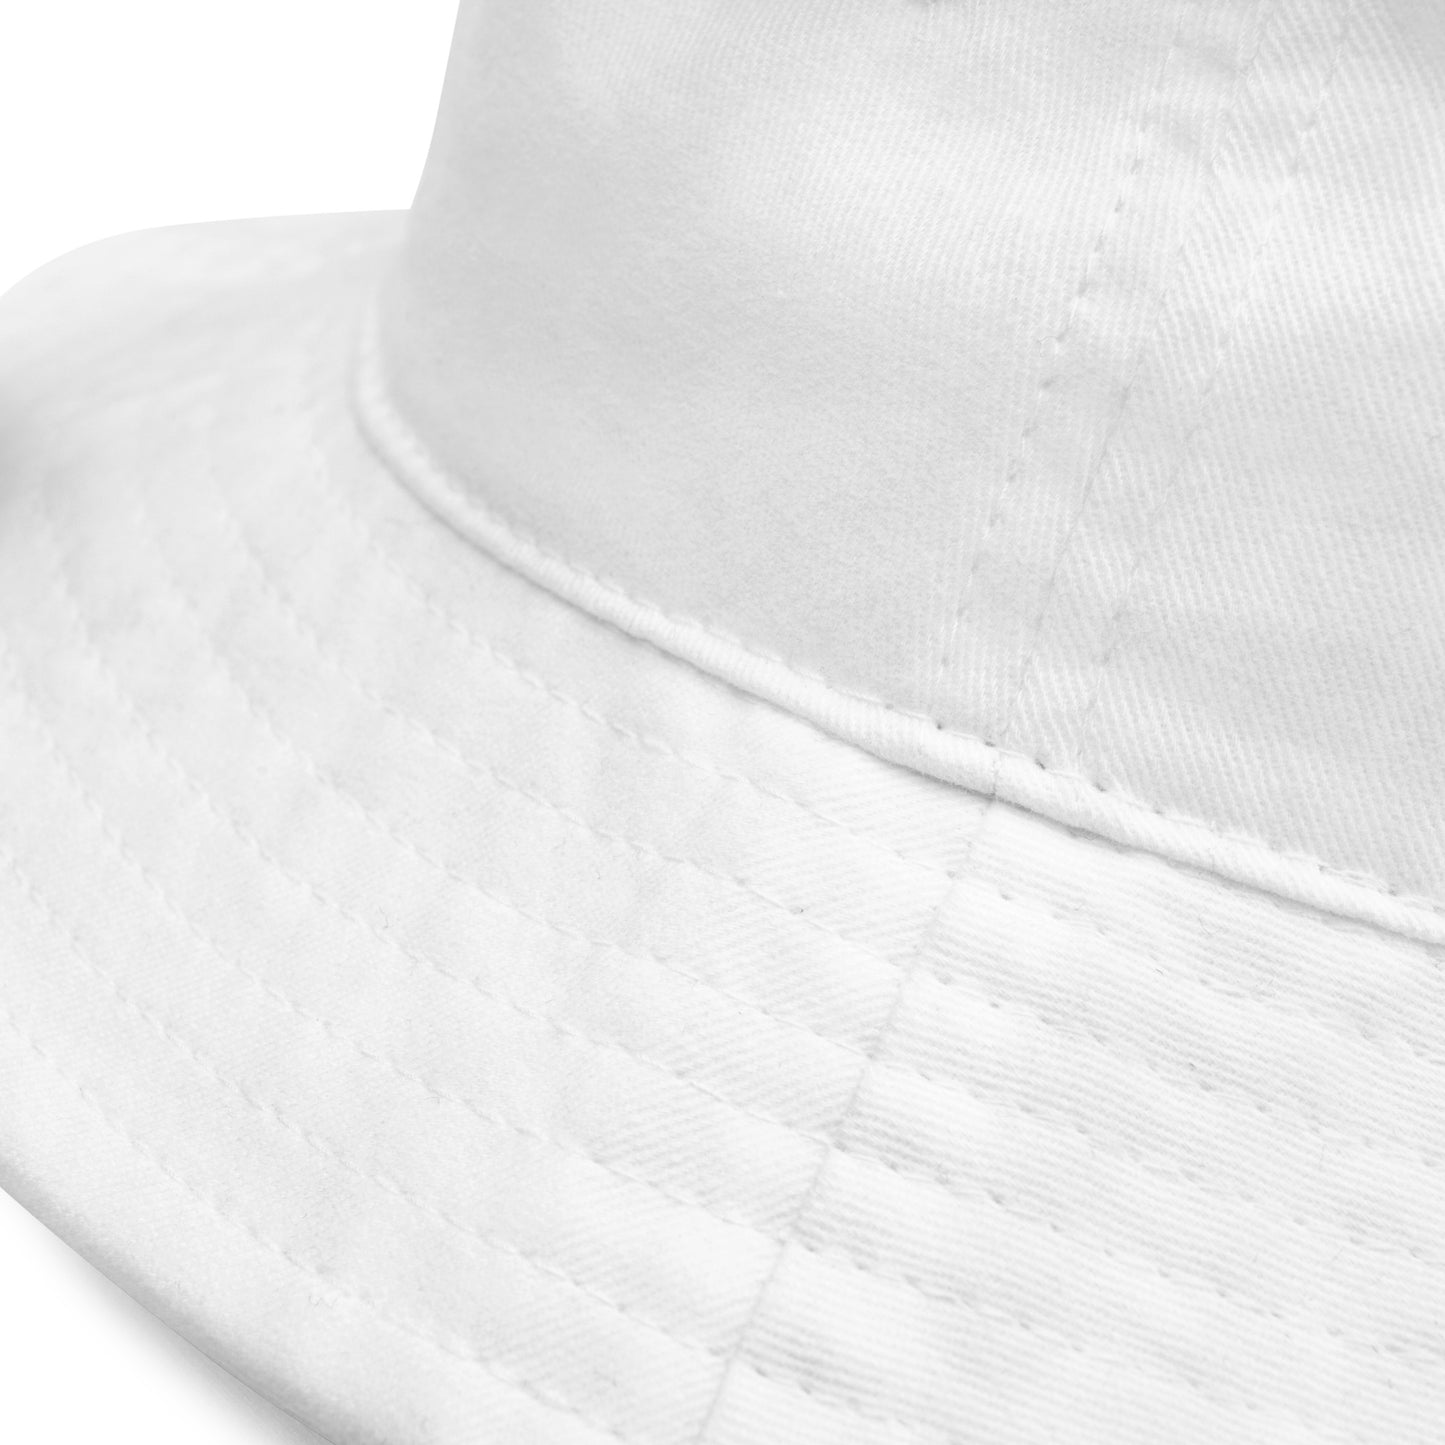 Men's white hat with embroidery.